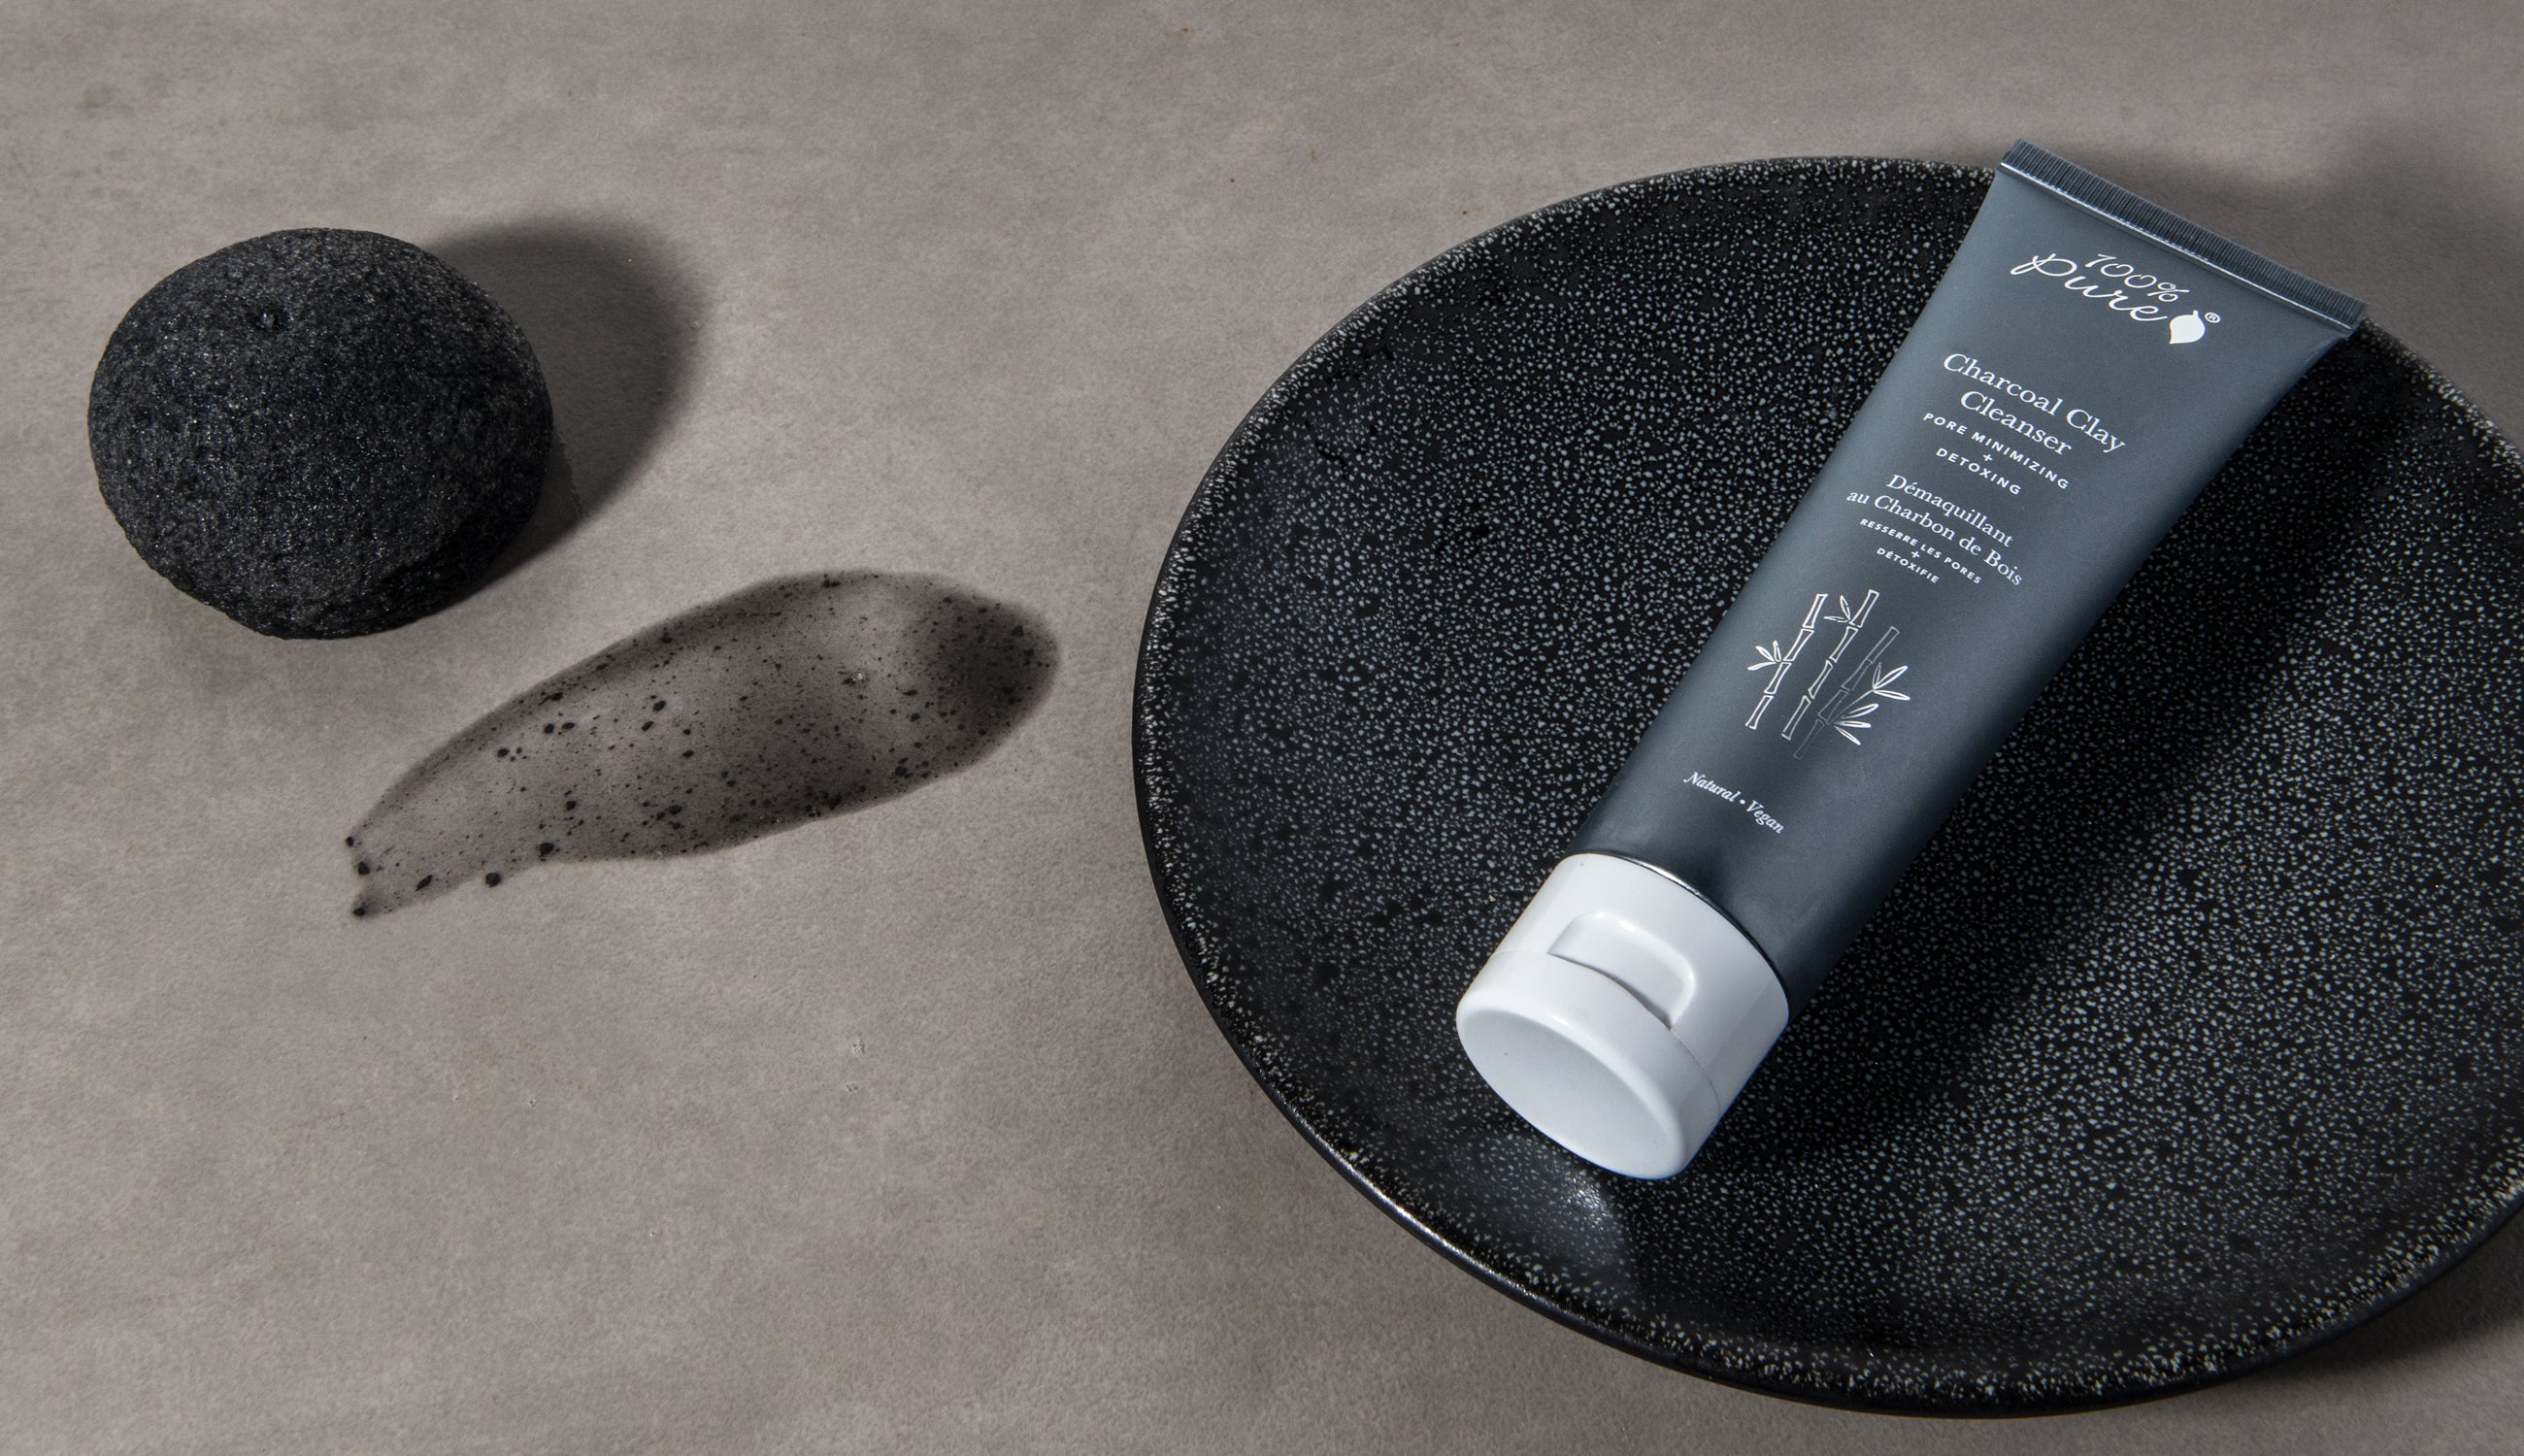 100% PURE Charcoal Clay Cleanser